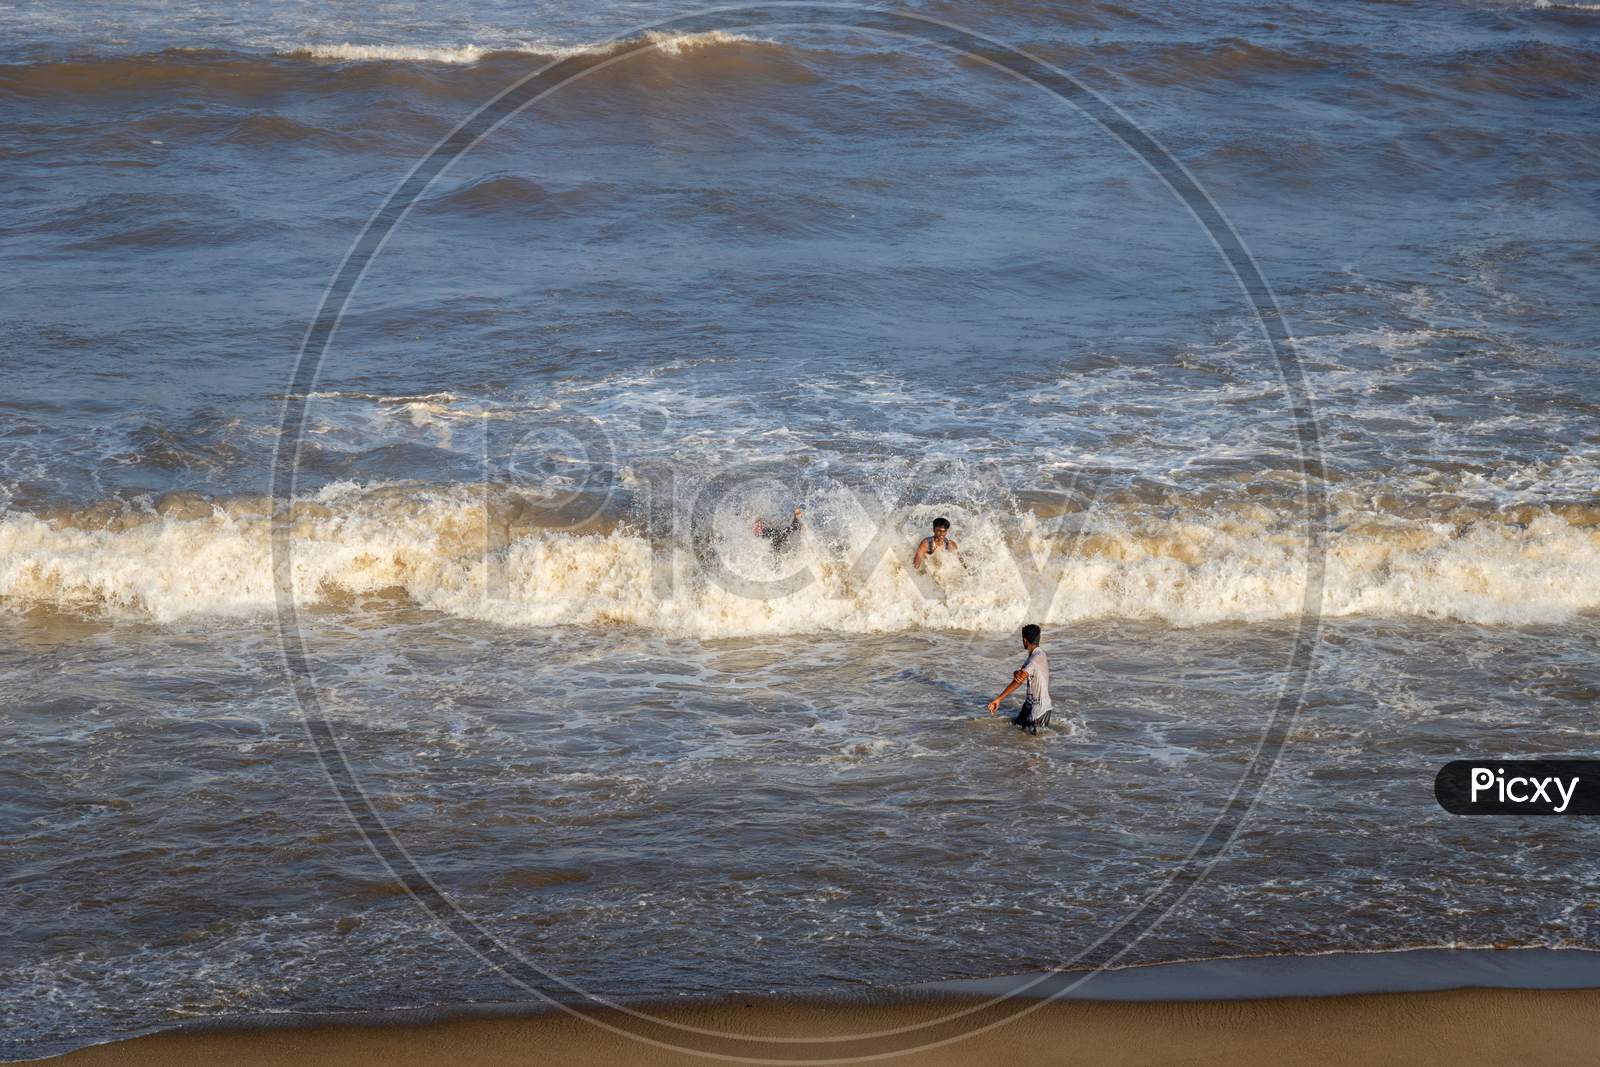 Chennai, Tamil Nadu, India - Pondycherry 21 02 2021: Two Men Playing On Water In The Beach